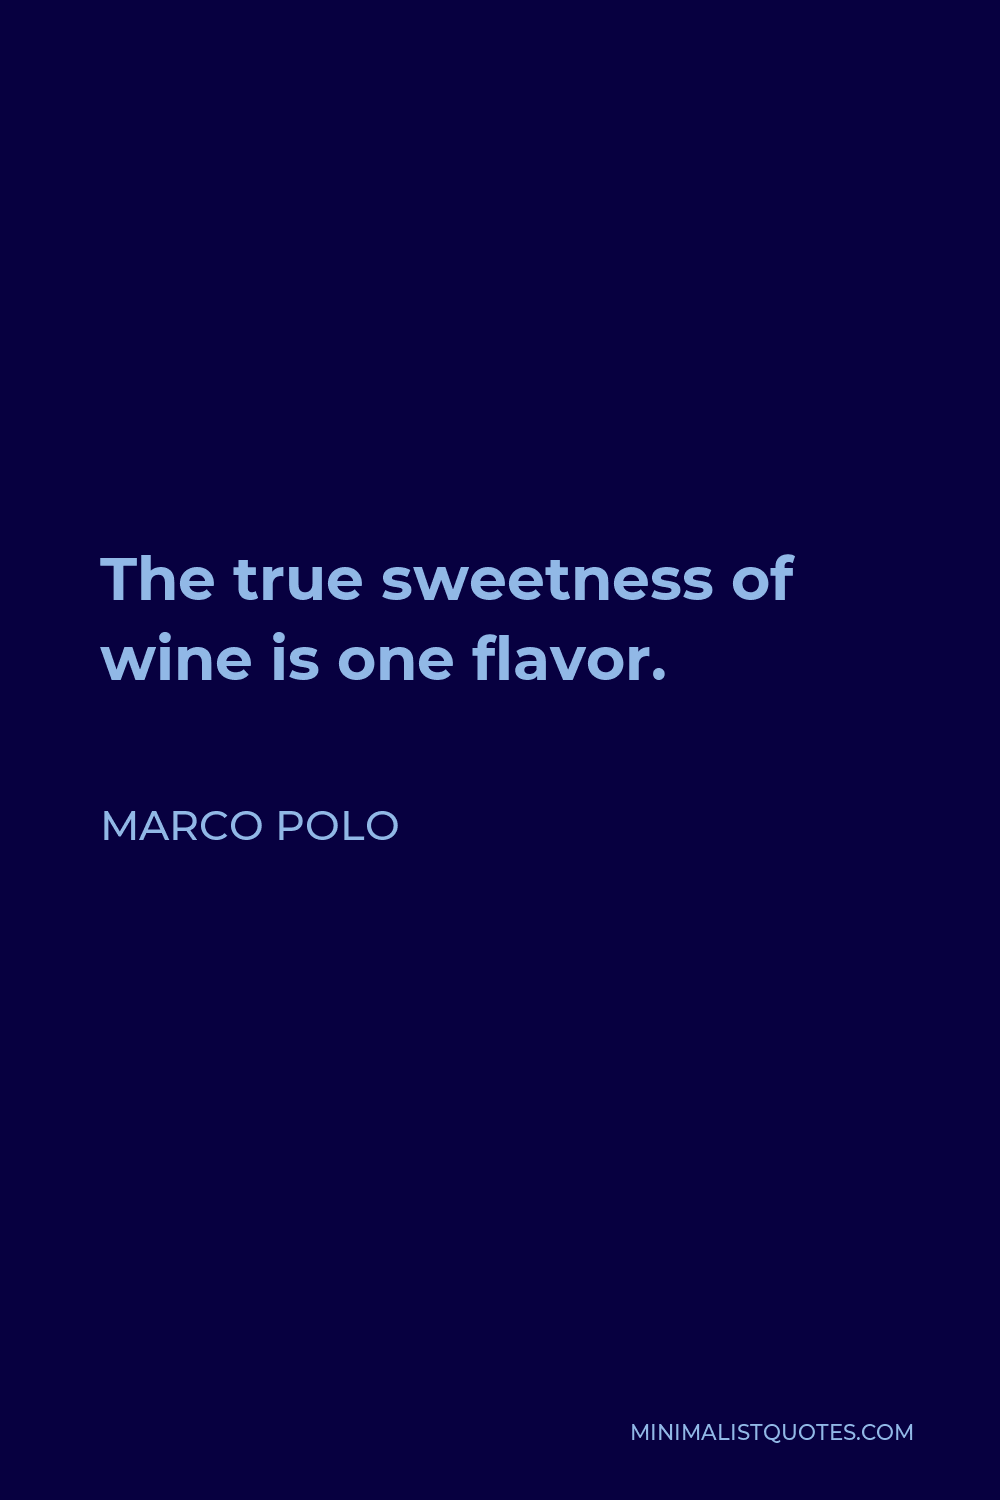 Marco Polo Quote - The true sweetness of wine is one flavor.